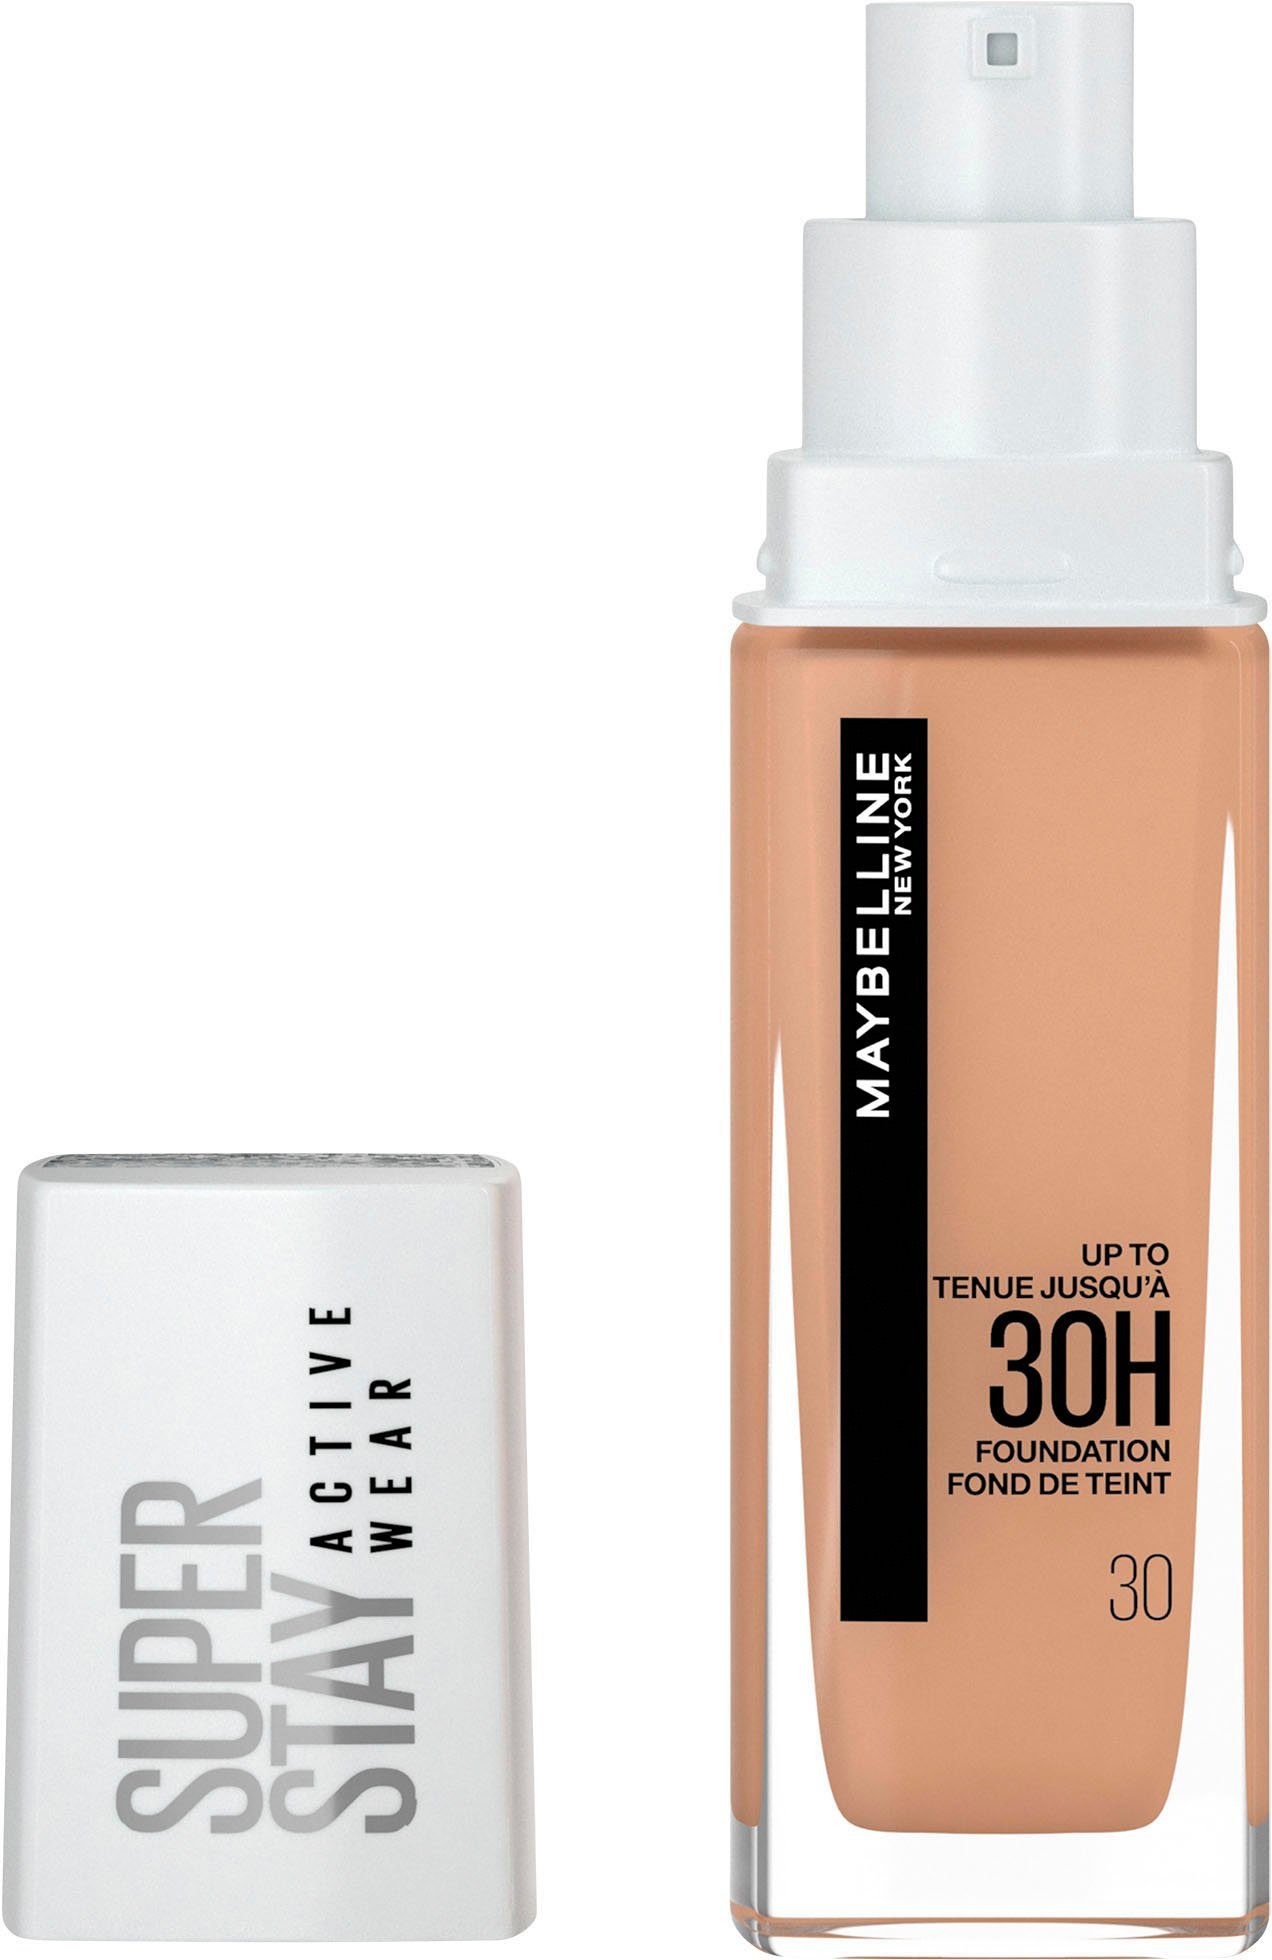 MAYBELLINE NEW YORK Foundation Wear Active 30 Super Sand Stay